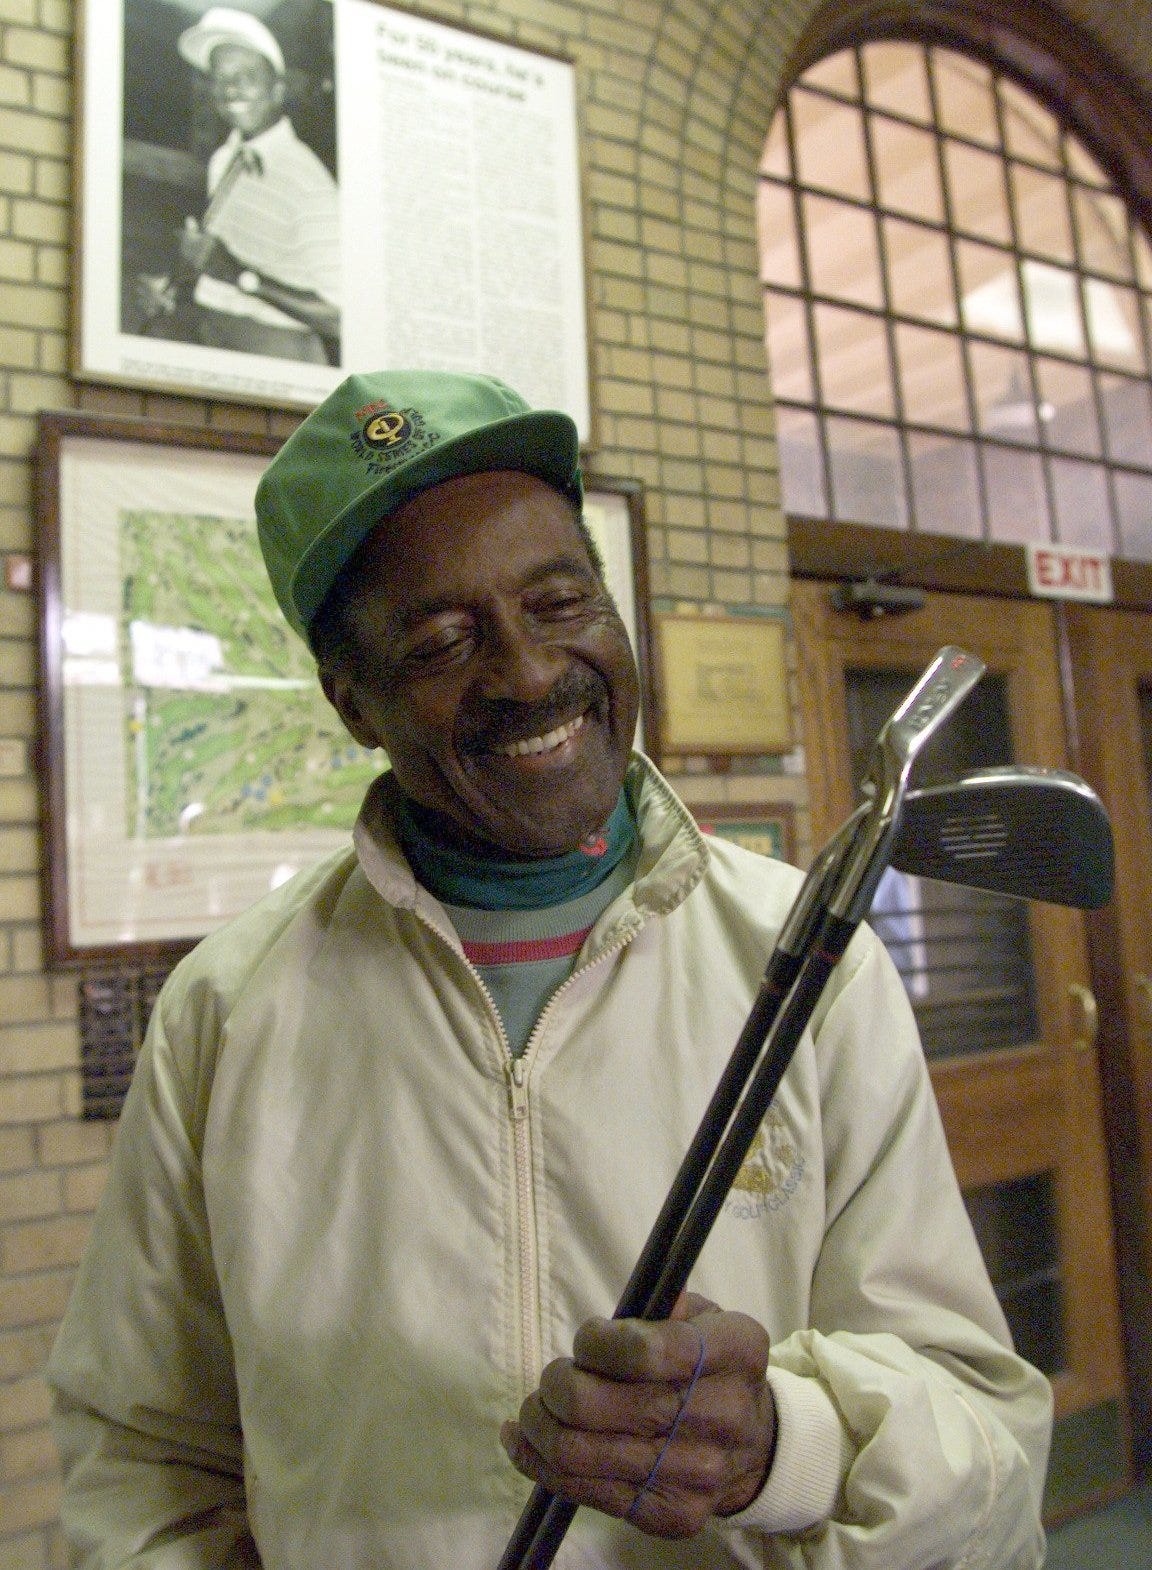 ‘He’s our Jackie Robinson of golf’: This Michigan golf legend posthumously gets his day in the limelight